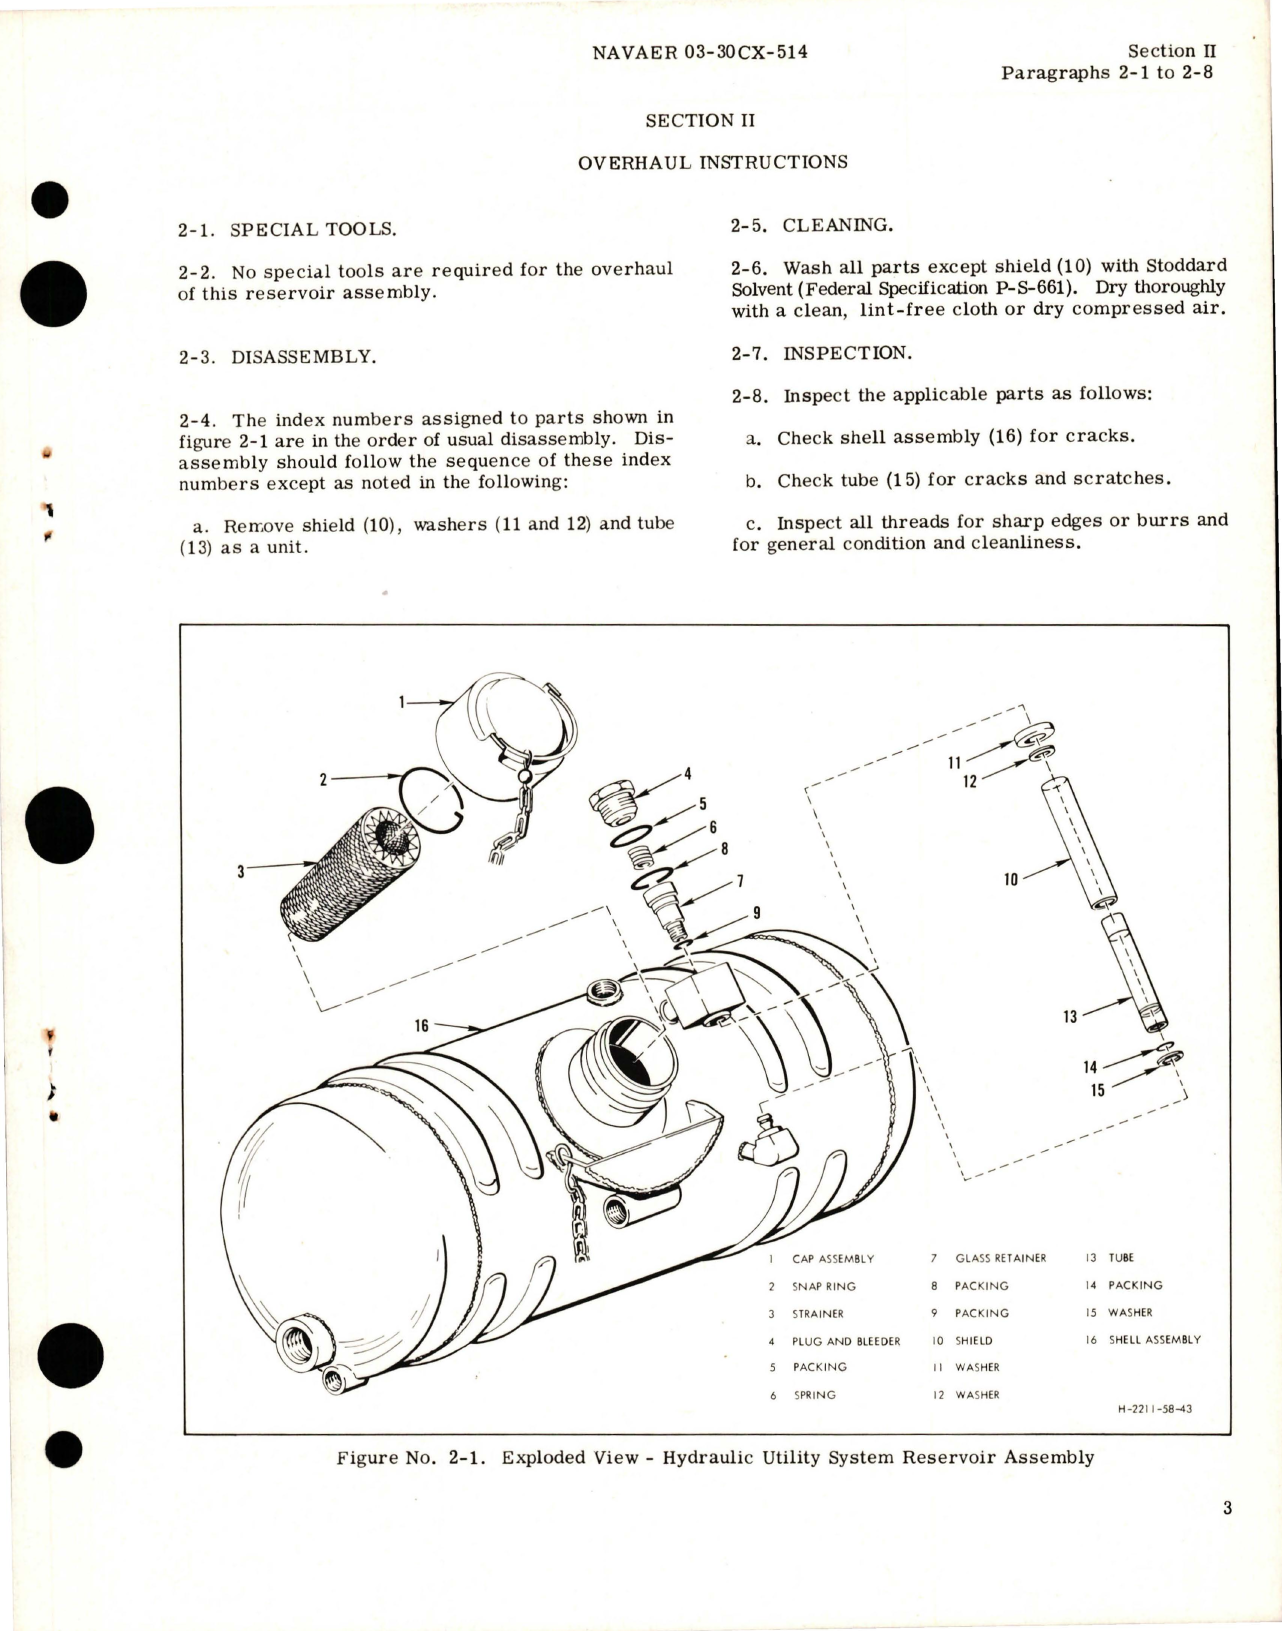 Sample page 5 from AirCorps Library document: Overhaul Instructions for Hydraulic Utility System Reservoir Assembly - Part 181-58051